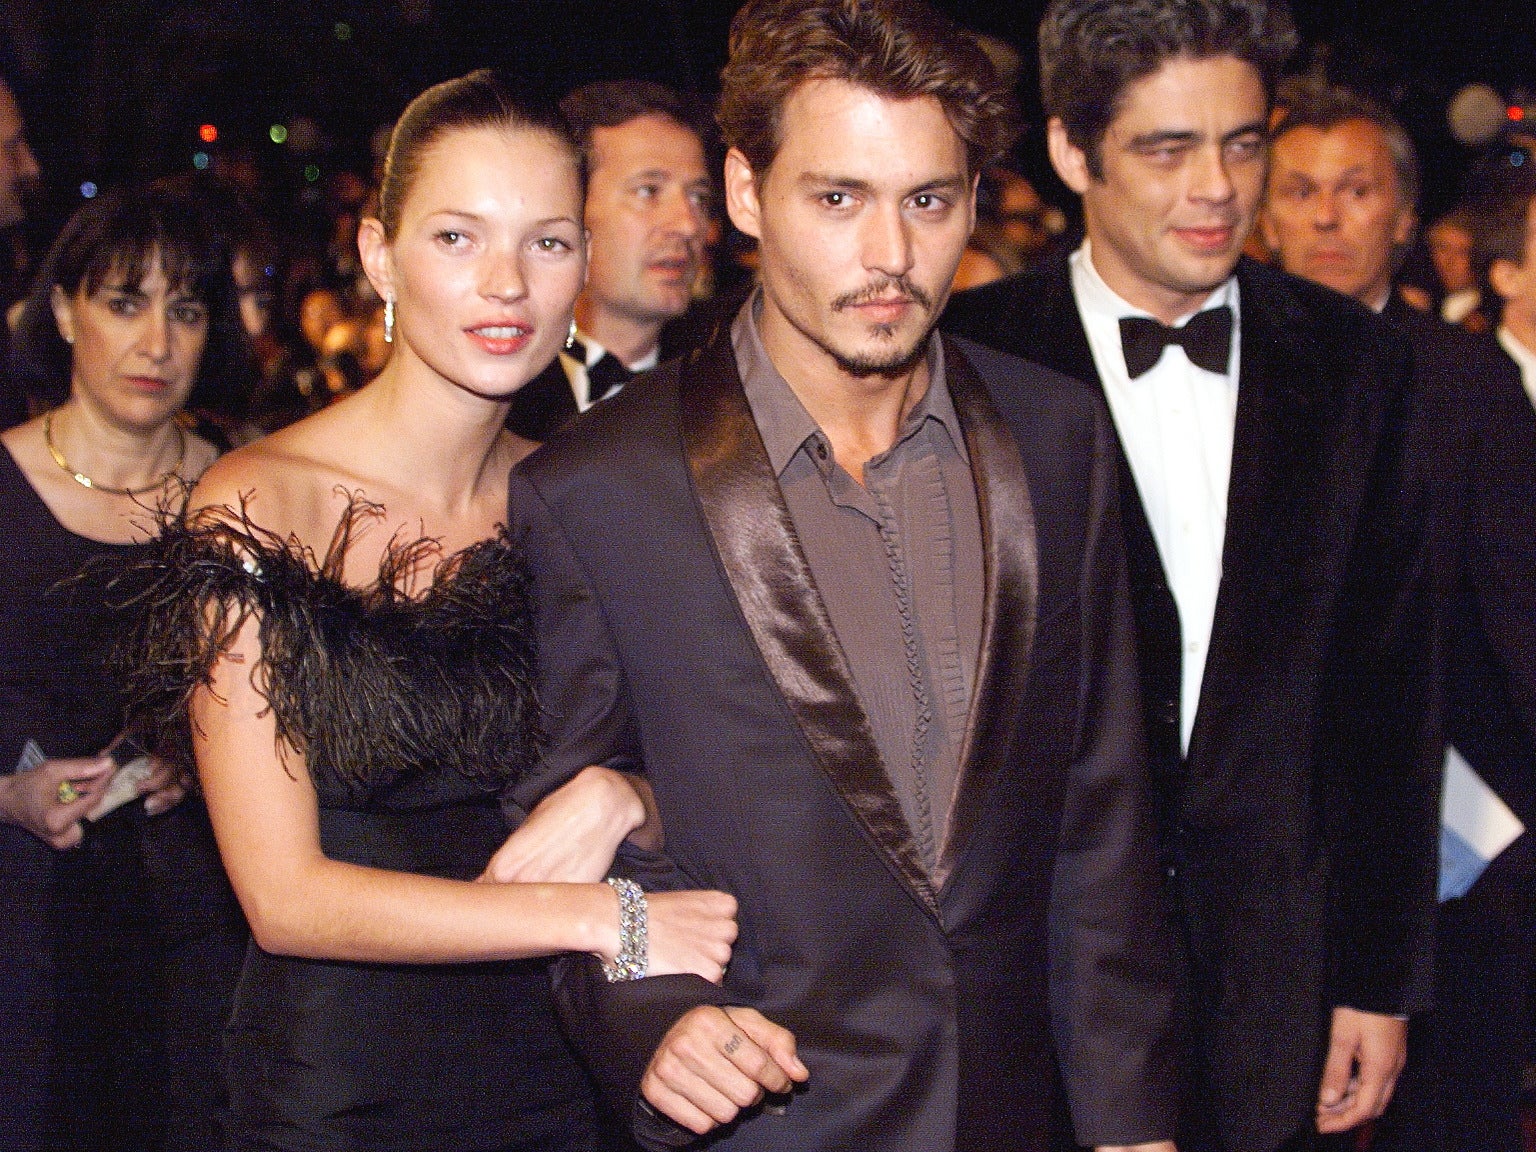 Actors Johnny Depp (C) and Benicio Del Toro (R) accompanied by model Kate Moss (2nd L) arrive, 15 May at the Palais des festivals for the screening of the film " Fear and Loathing in Las Vegas" by US director Terry Gilliam